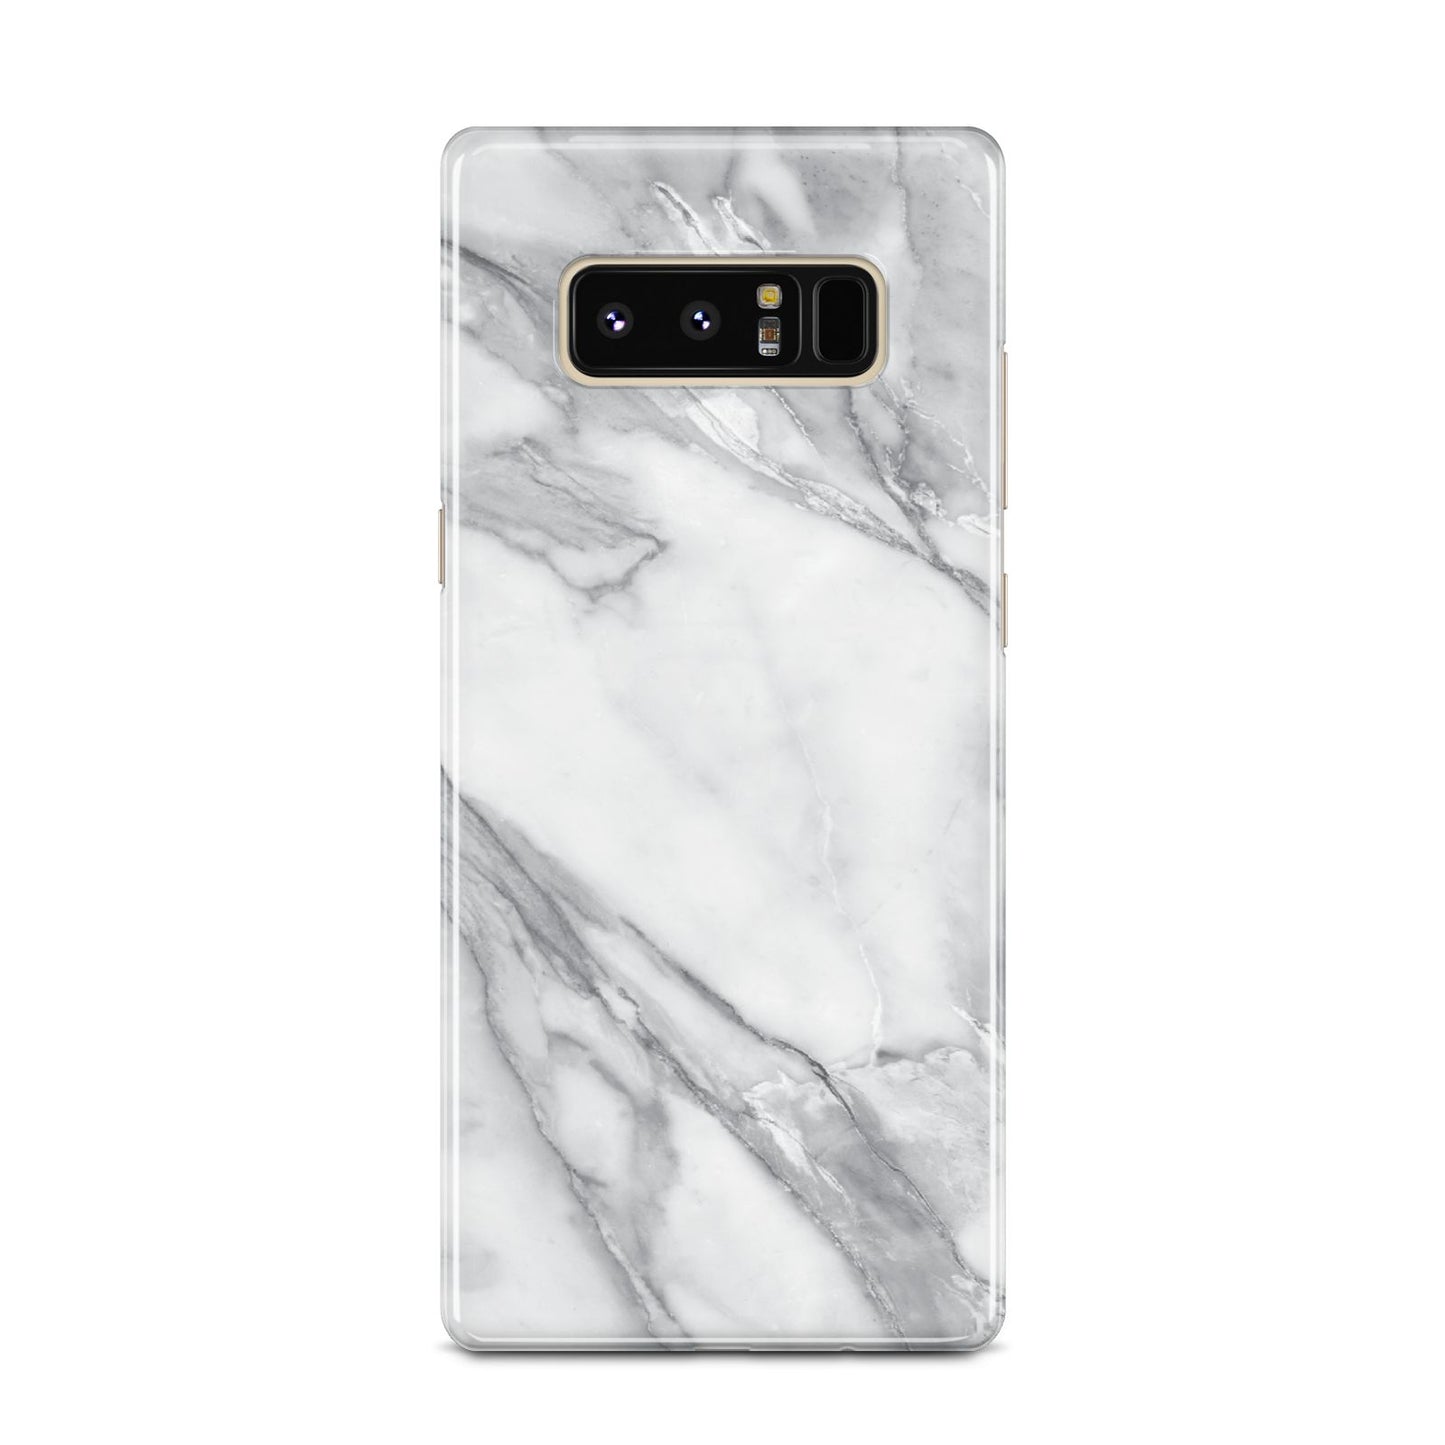 Faux Marble Effect White Grey Samsung Galaxy Note 8 Case